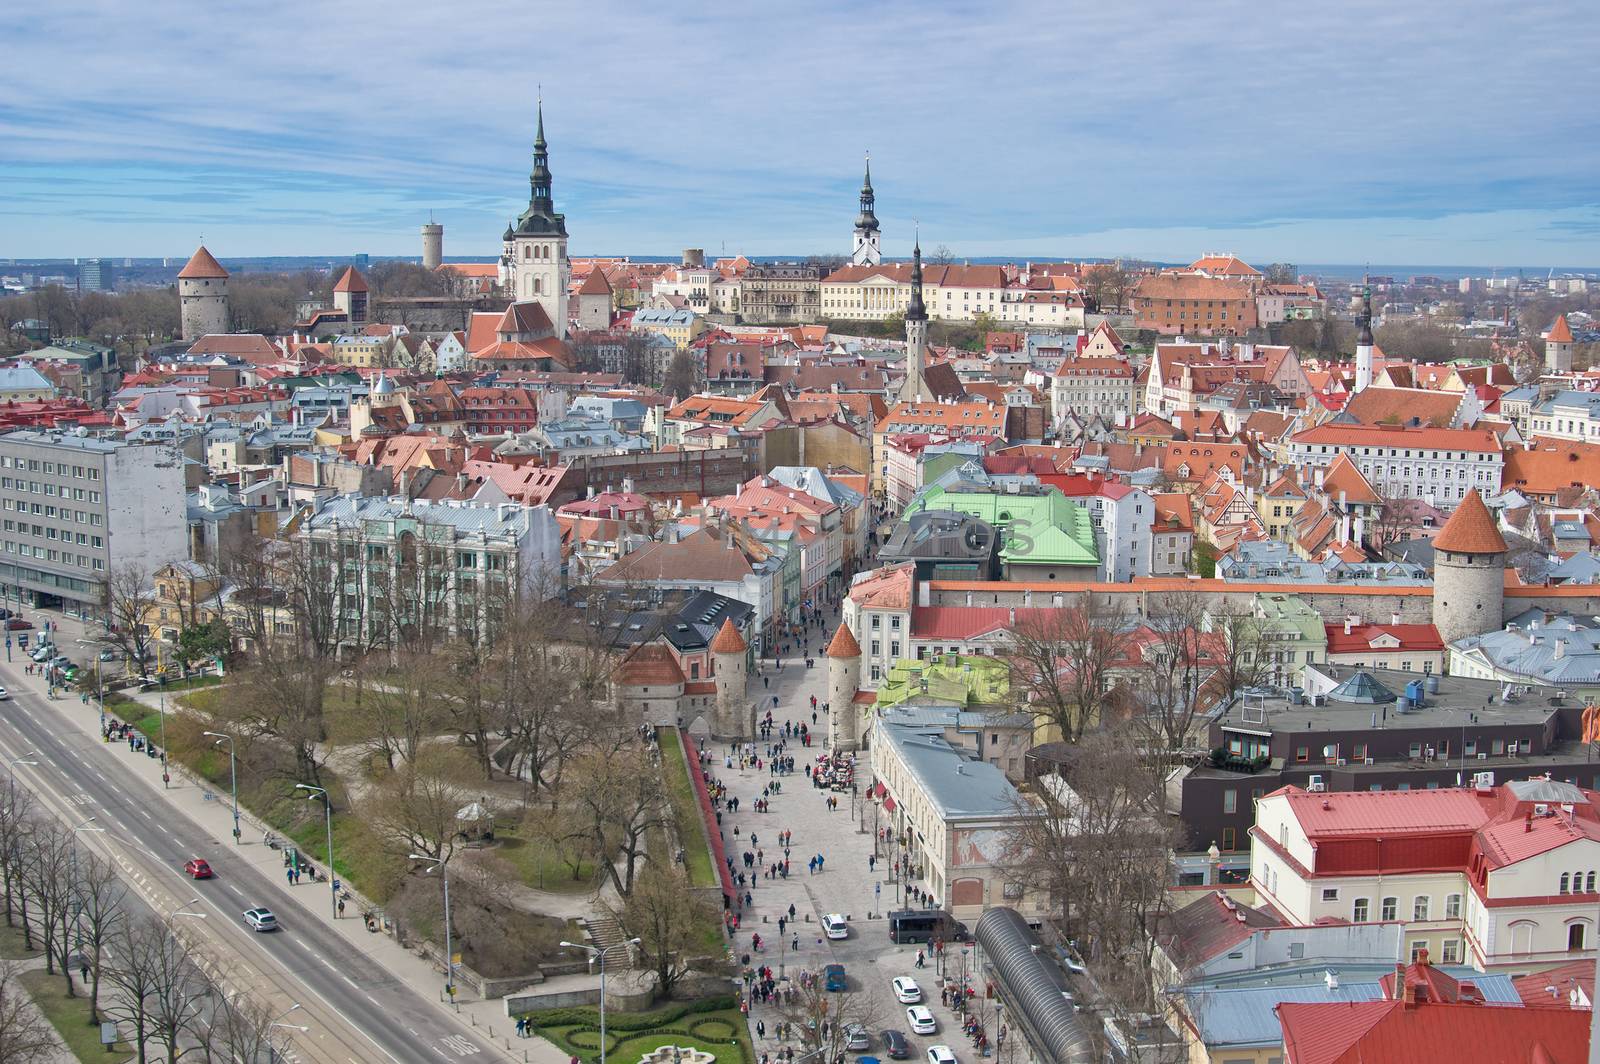 Aerial view of old city of Tallinn by eans